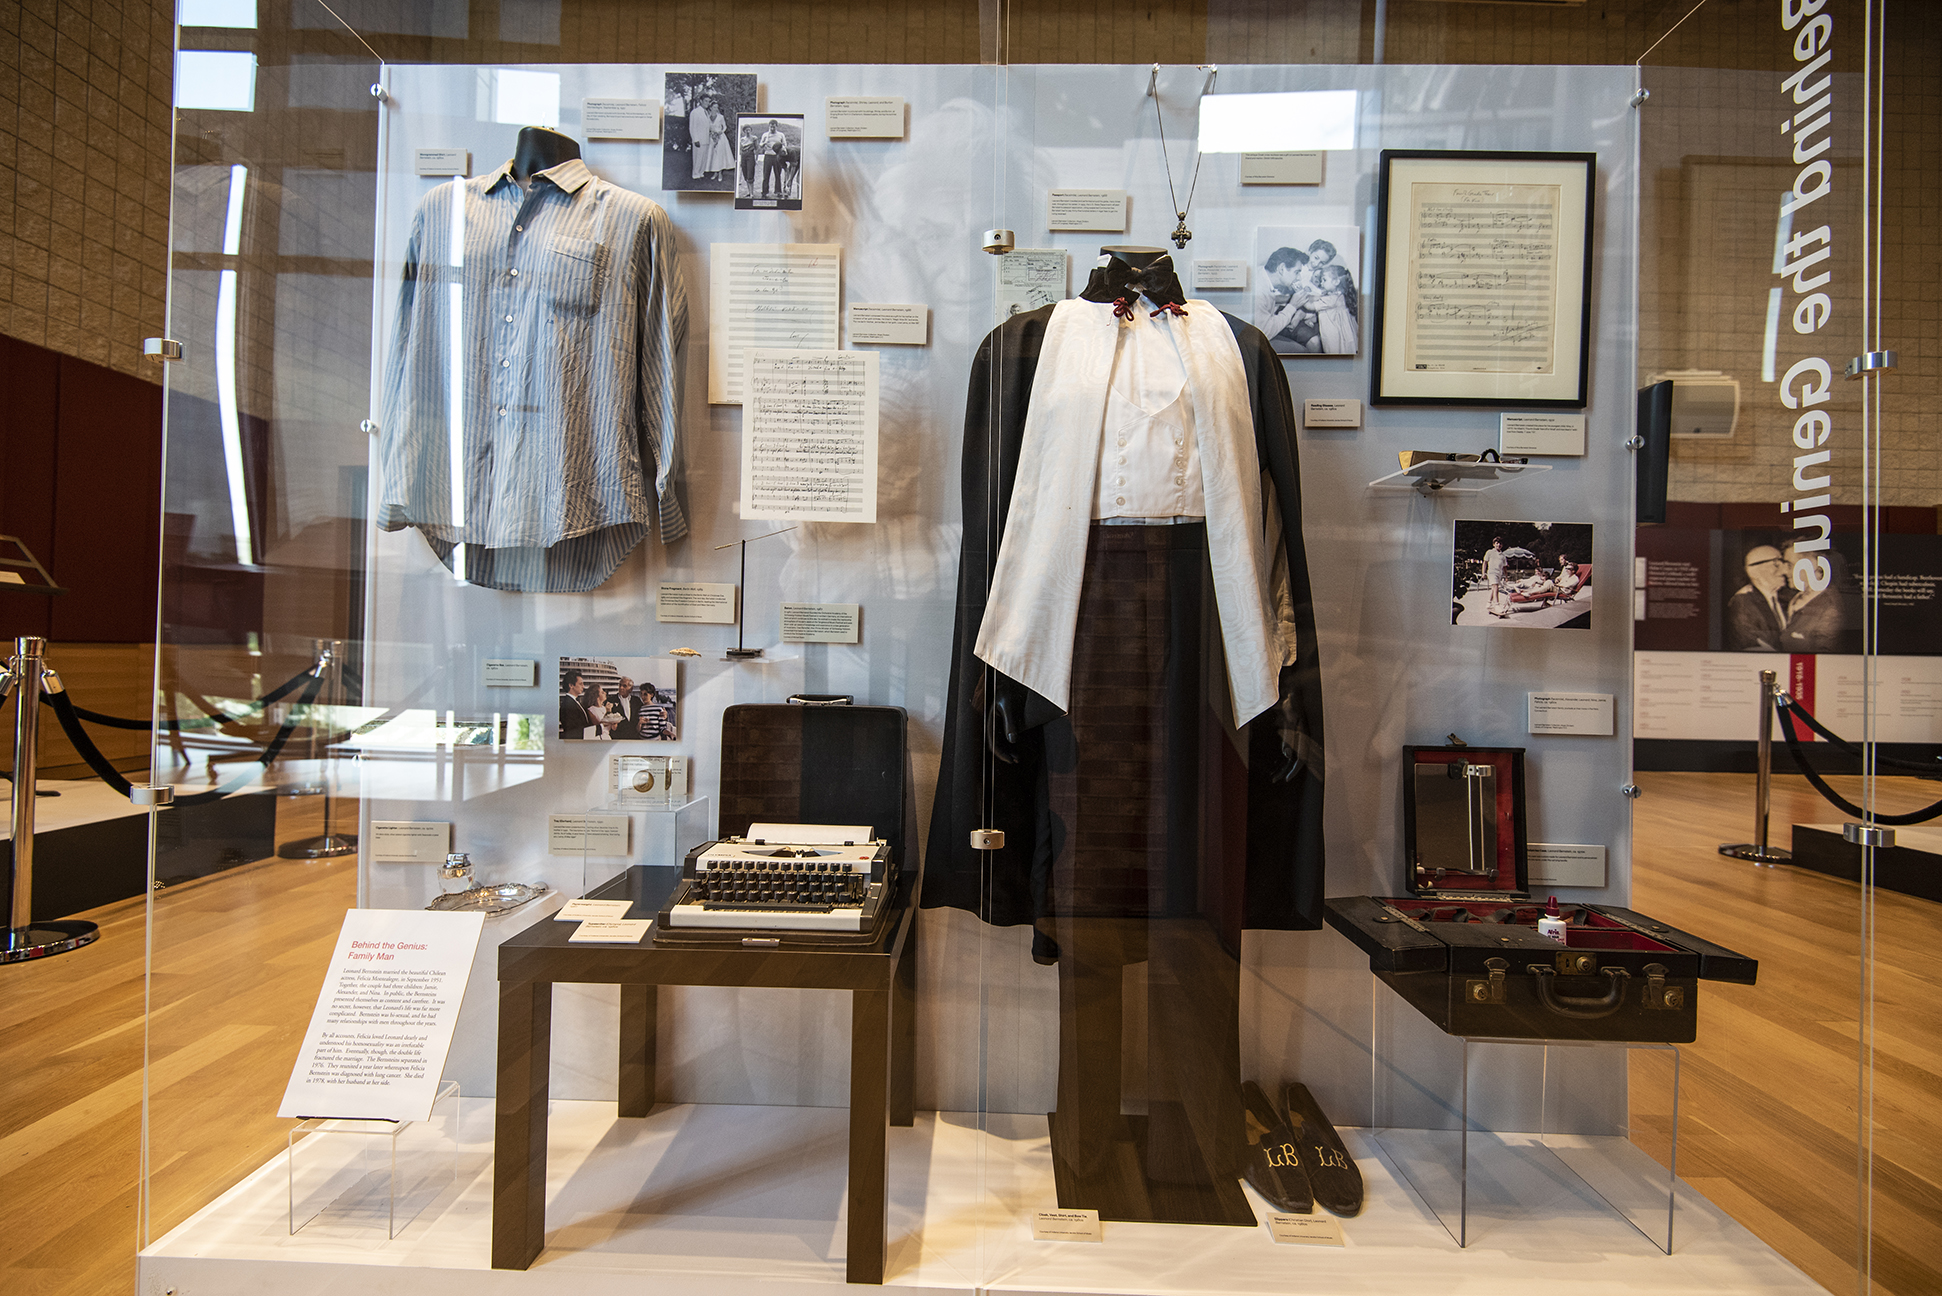 A tuxedo and other costume items, on display in the Leonard Bernstein at 100 exhibit at New England Conservatory's Burnes Hall.